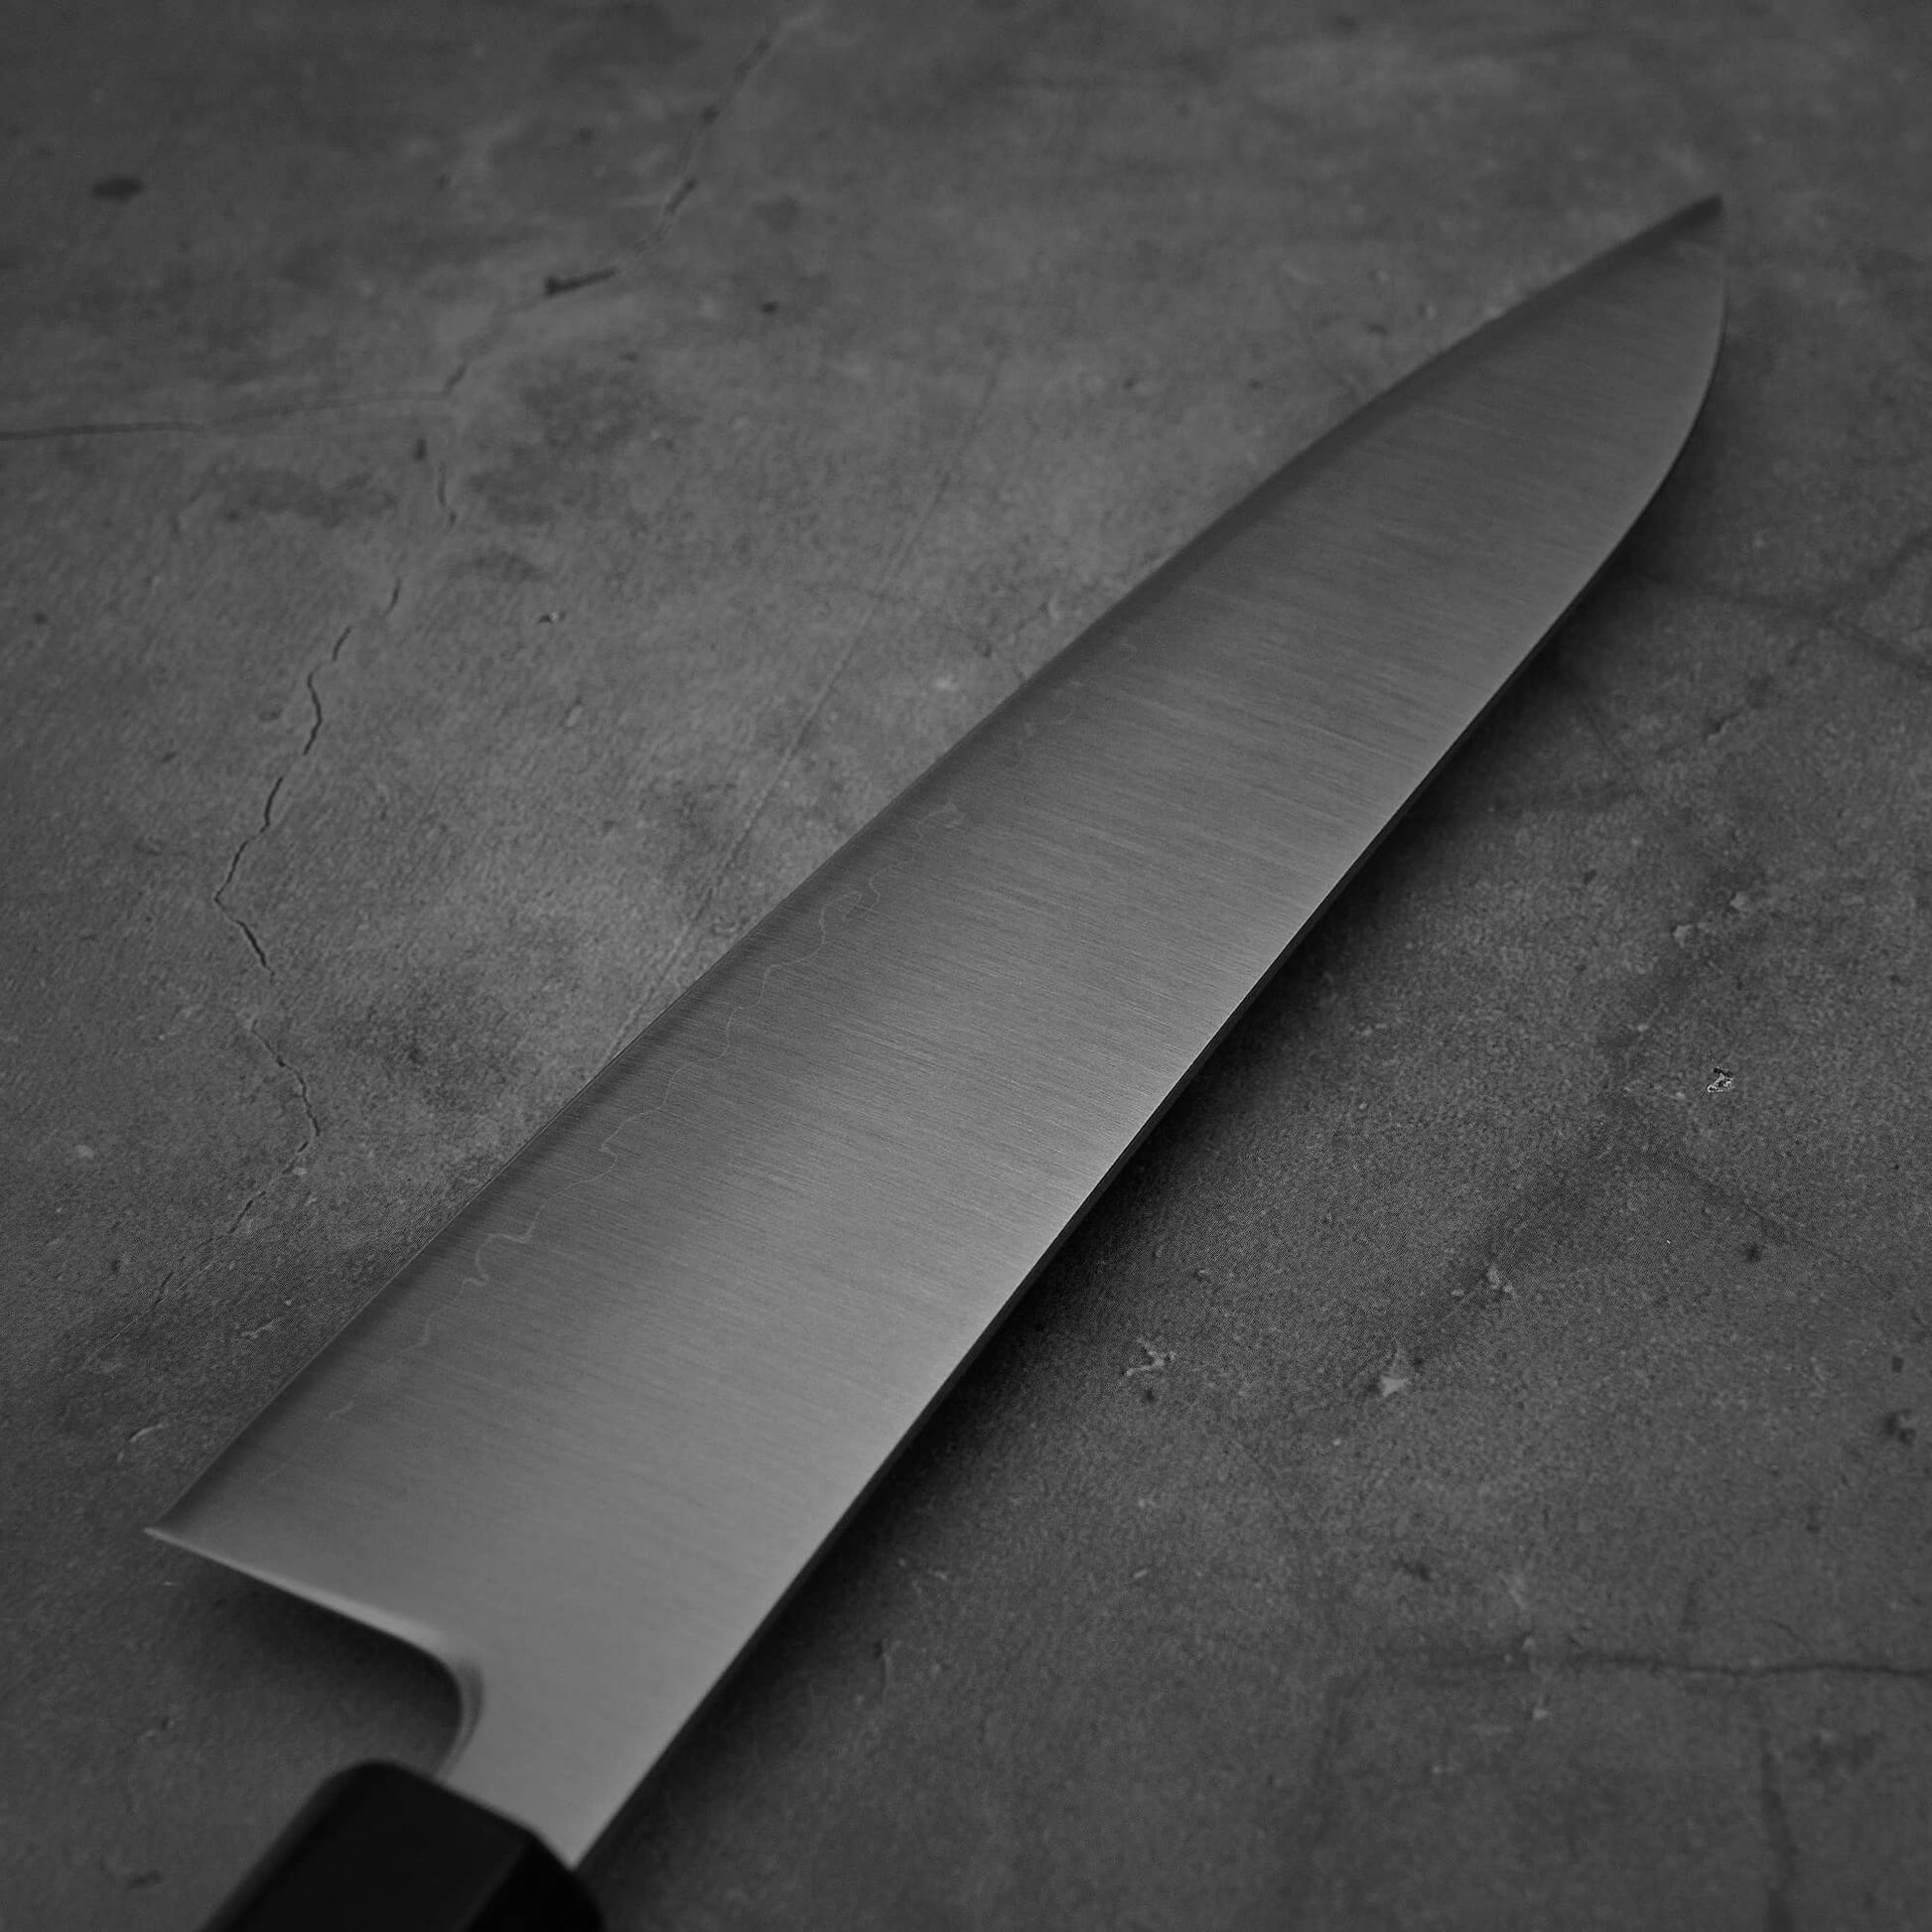 Close up view of the backside of Yoshihiro migaki aogami super gyuto. This Japanese chef's knife has an octagonal rosewood handle.